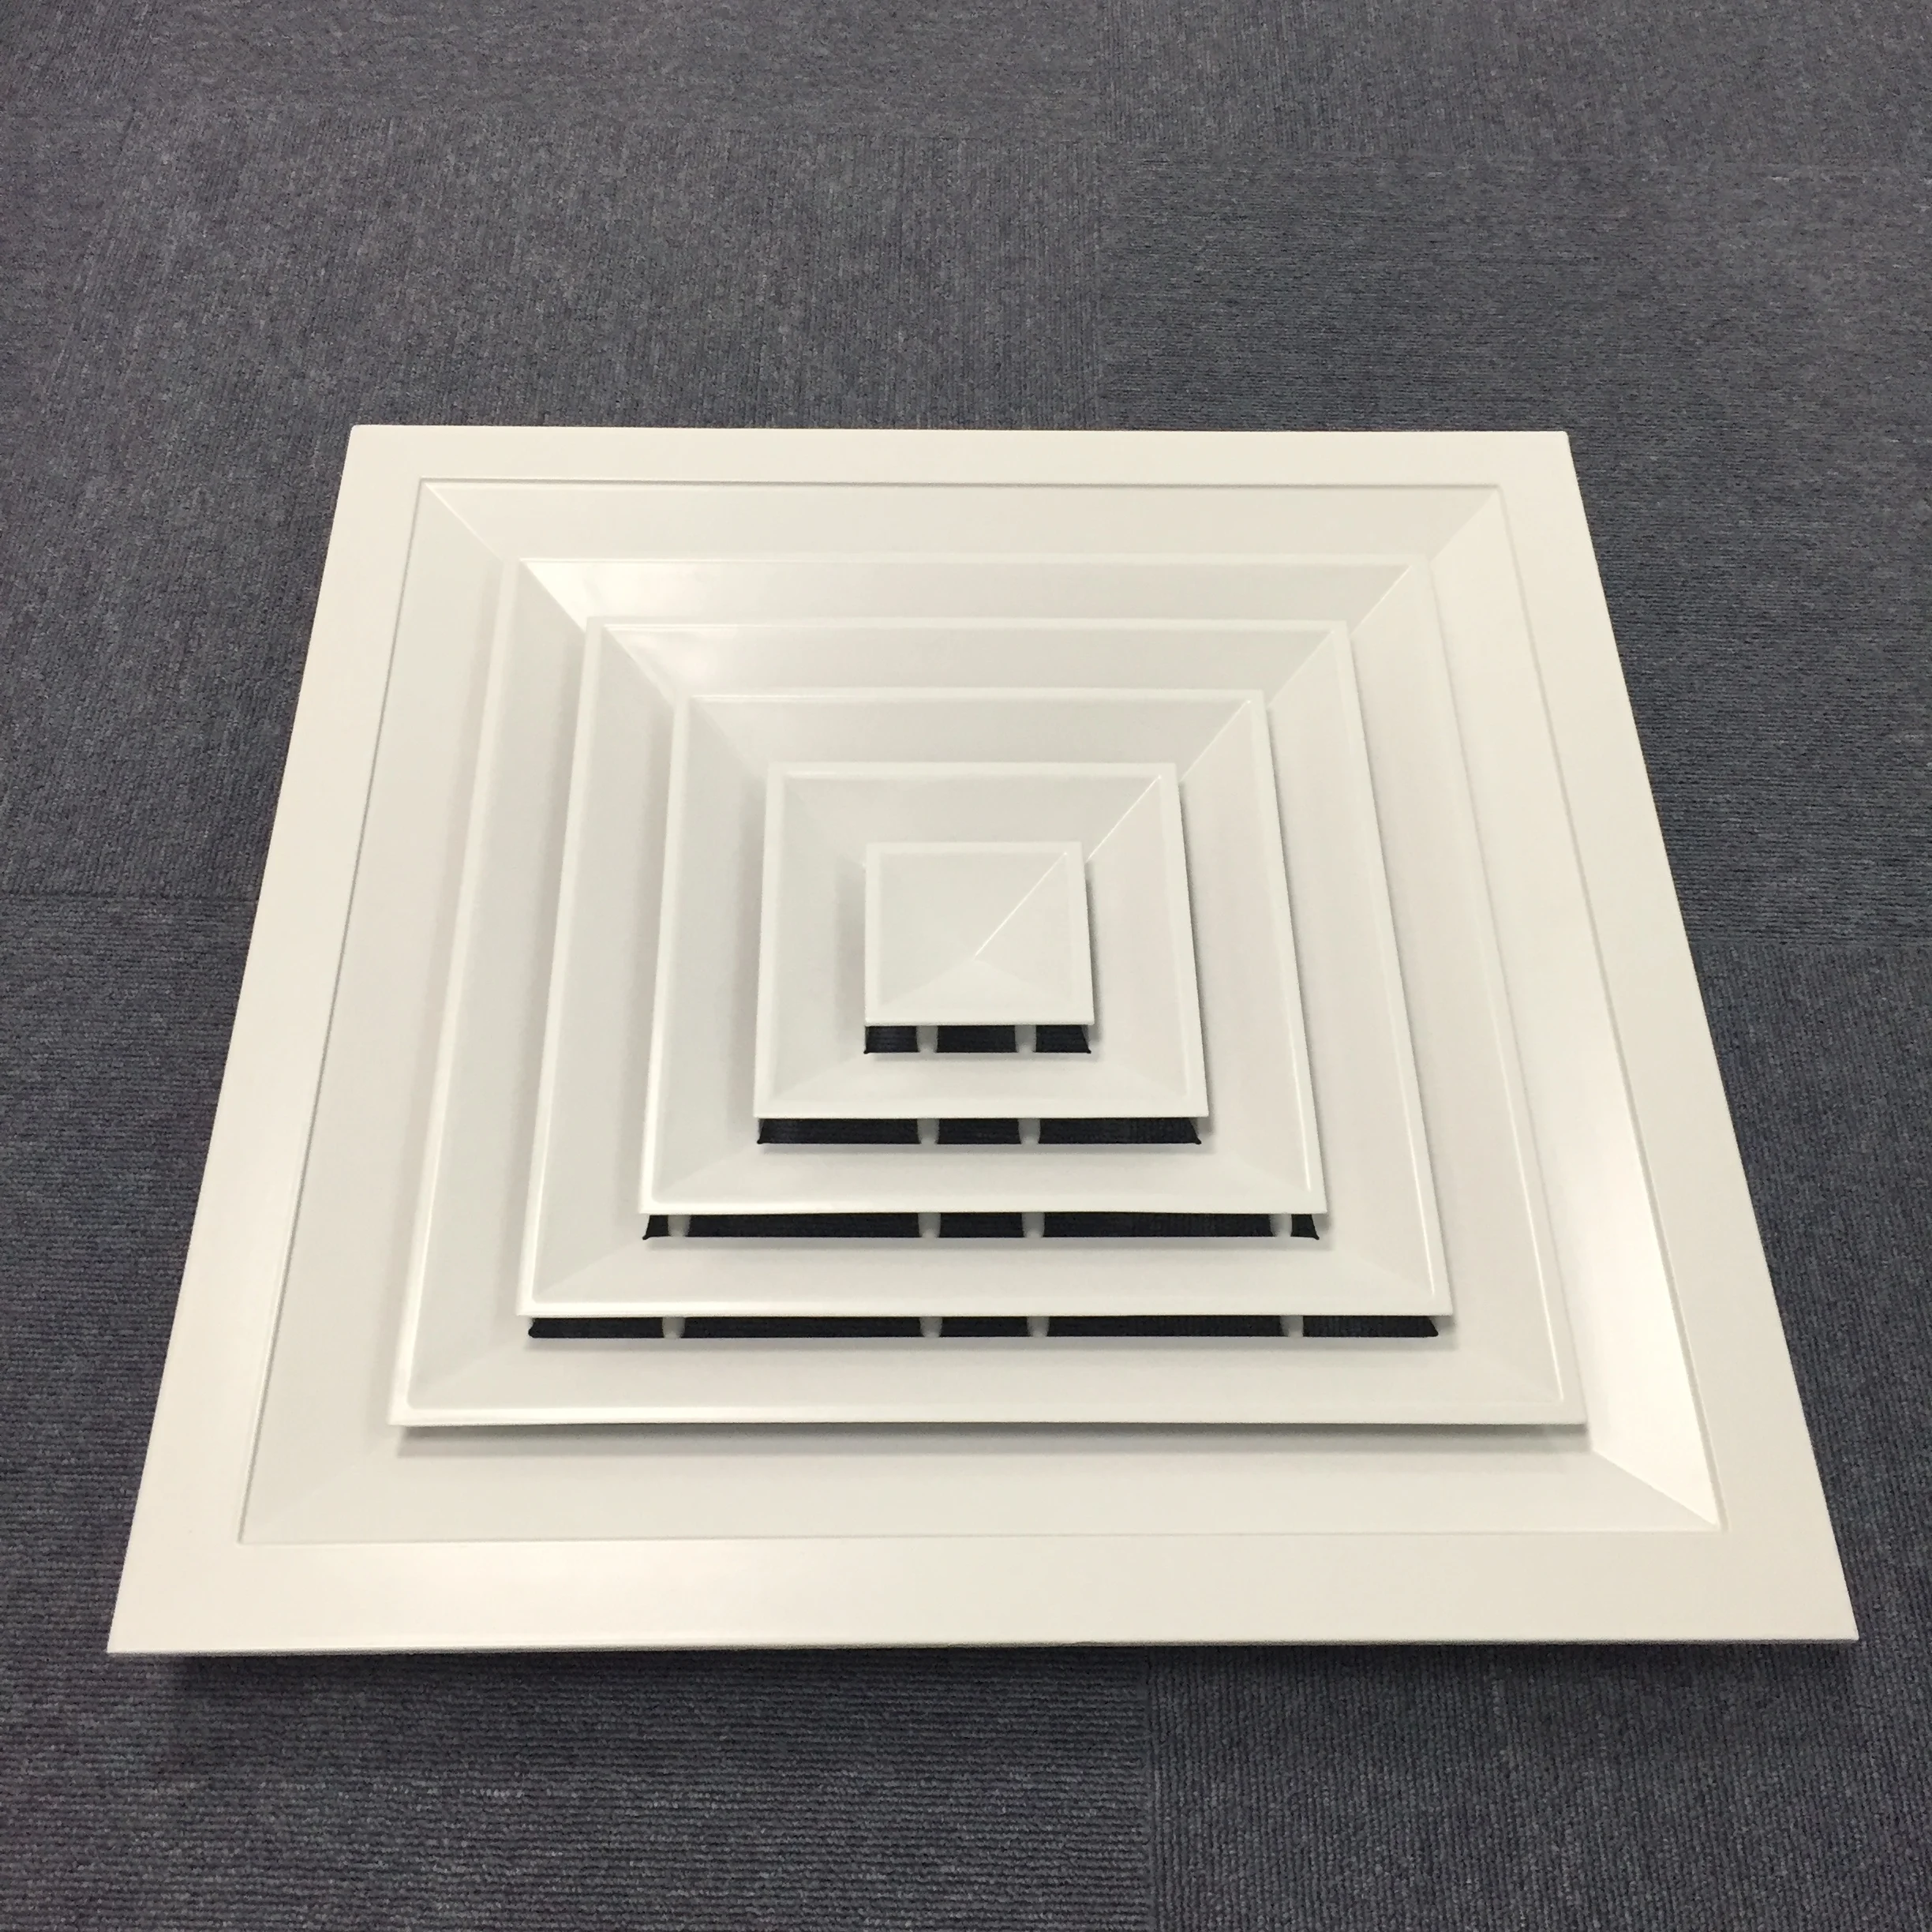 HVAC duct aluminum louver type removable 4 way air vent diffuser